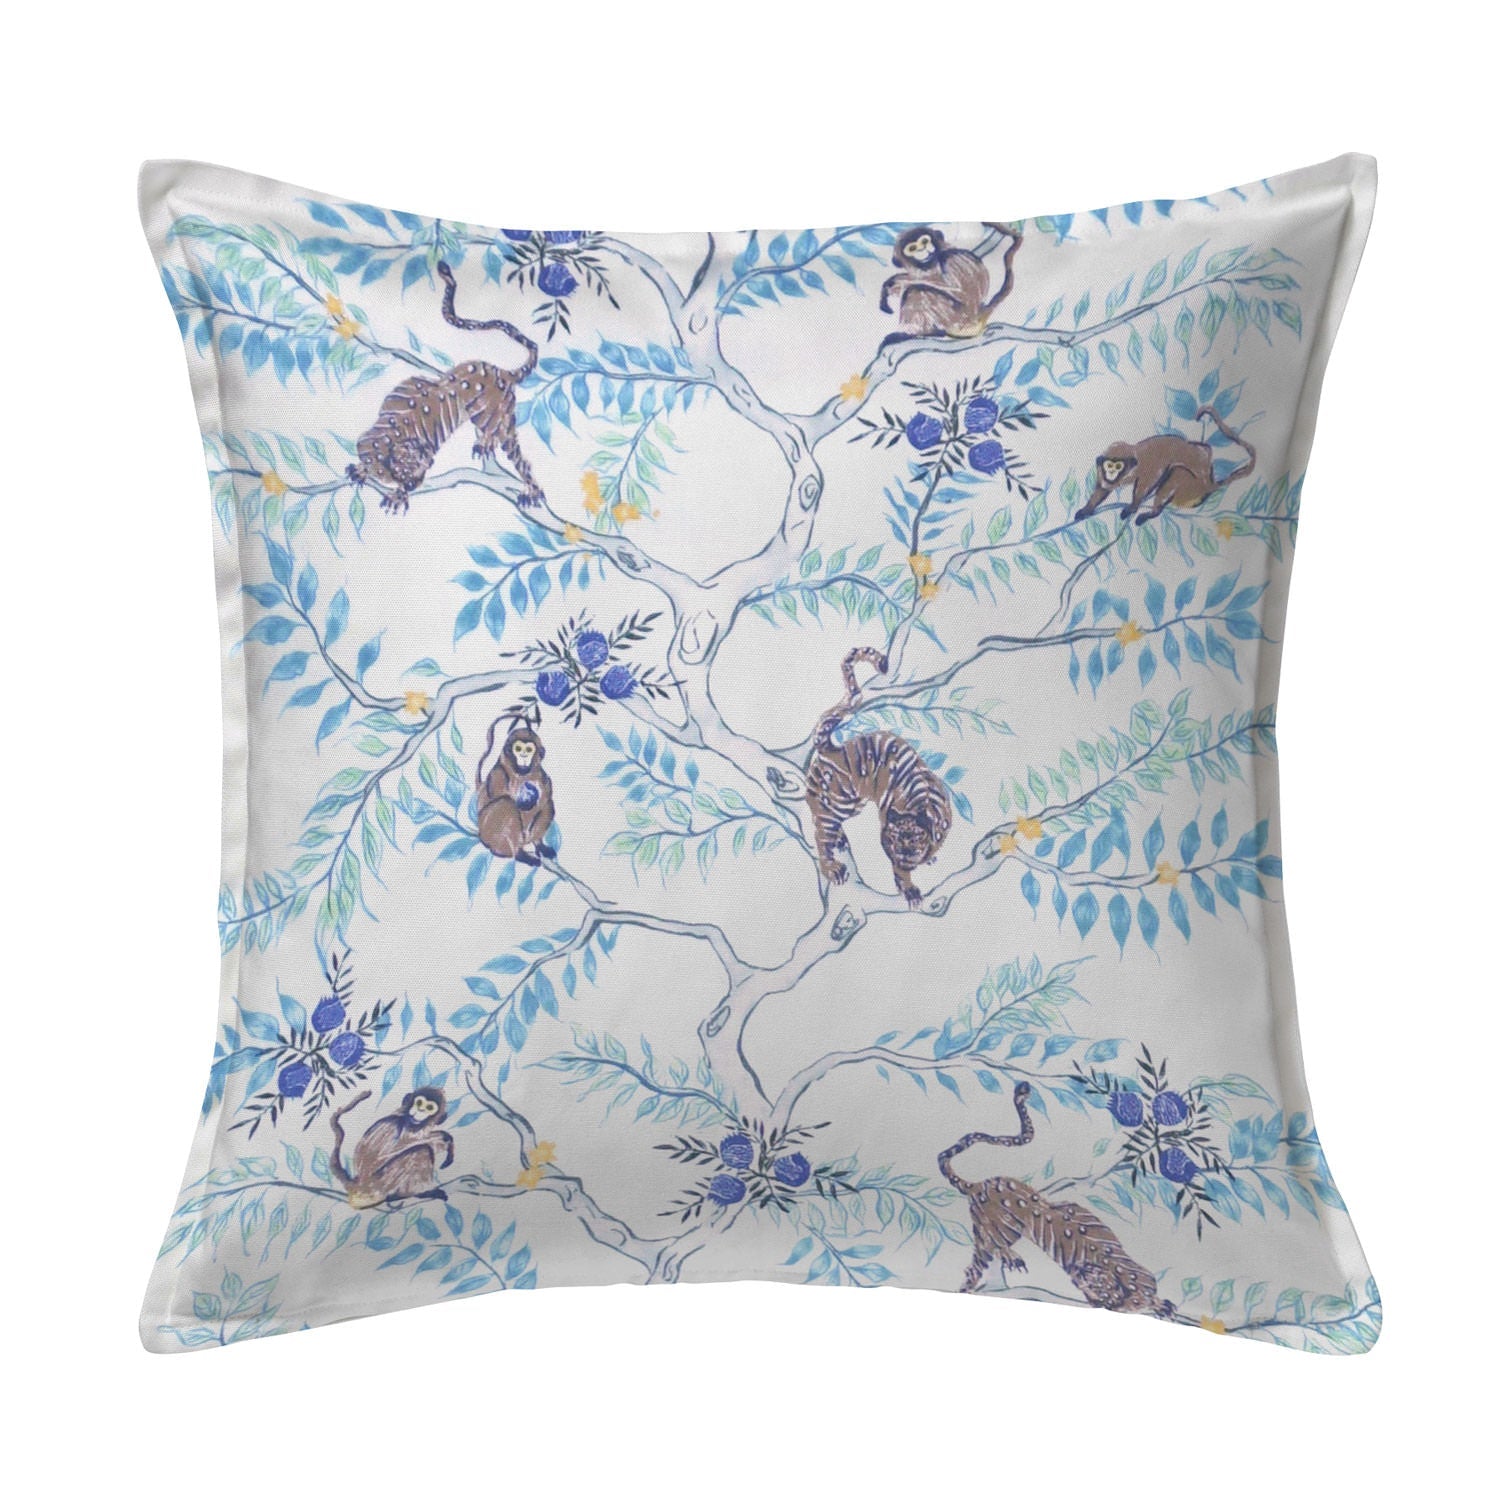 Monkey and Tiger Pillow in Dusk by Krane Home